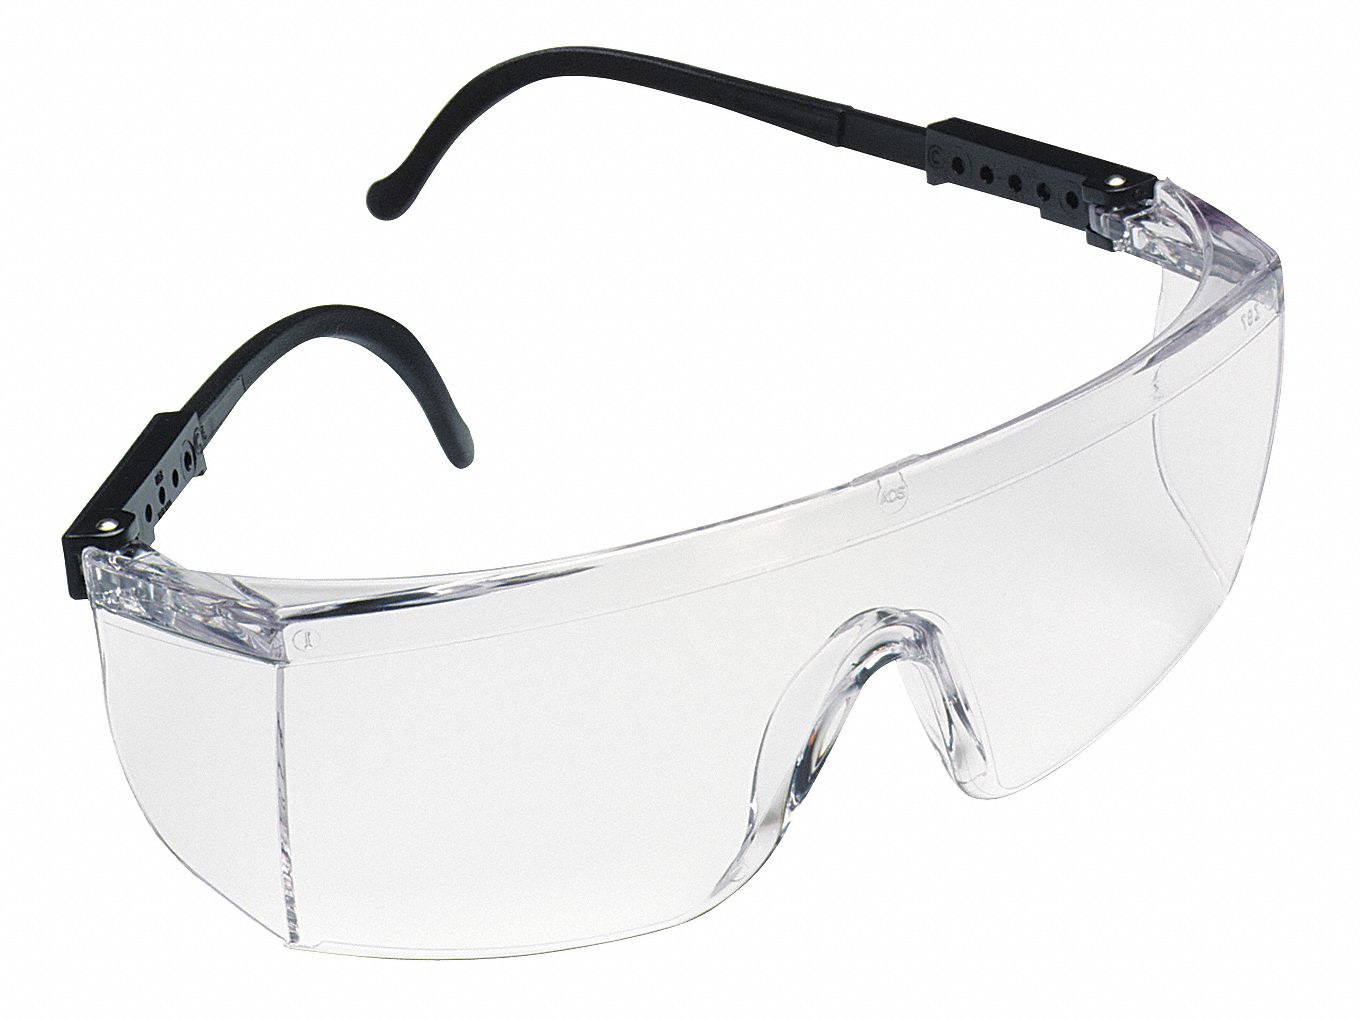 3m Seepro™ Anti Fog Safety Glasses Clear Lens Color 21a985 15957